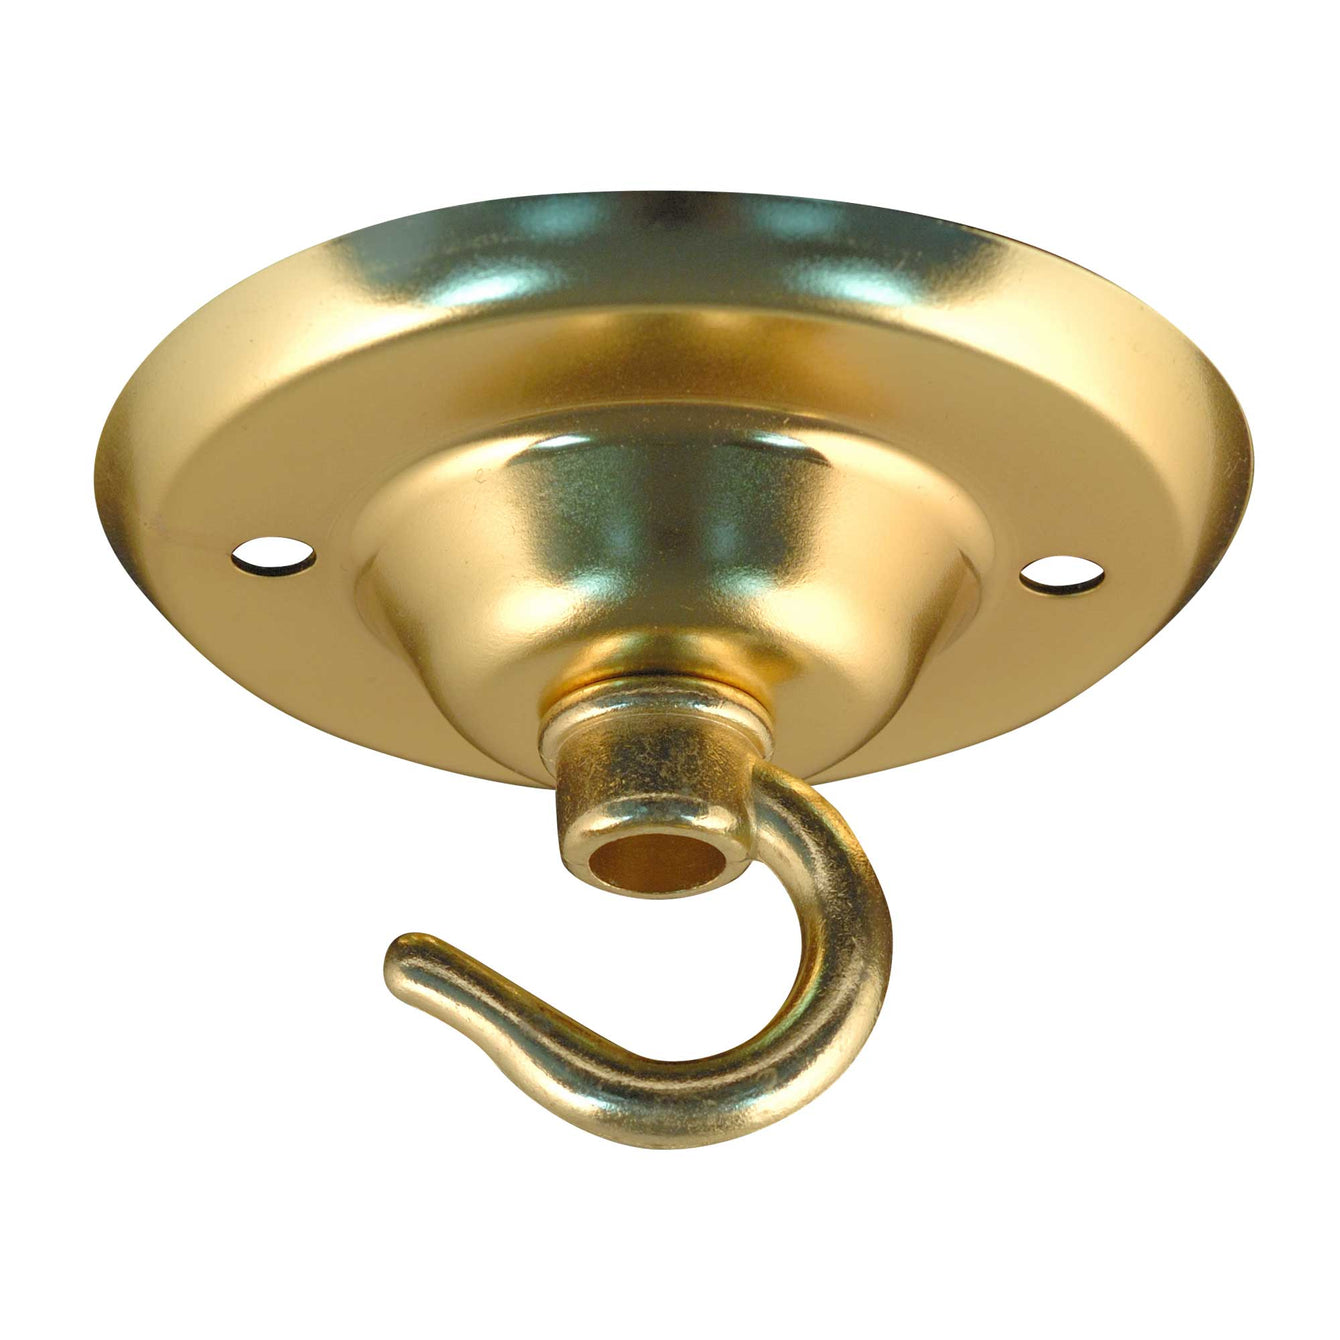 ElekTek 75mm Diameter Ceiling Plate with Hook Metallic Finishes Powder Coated Colours Antique Brass